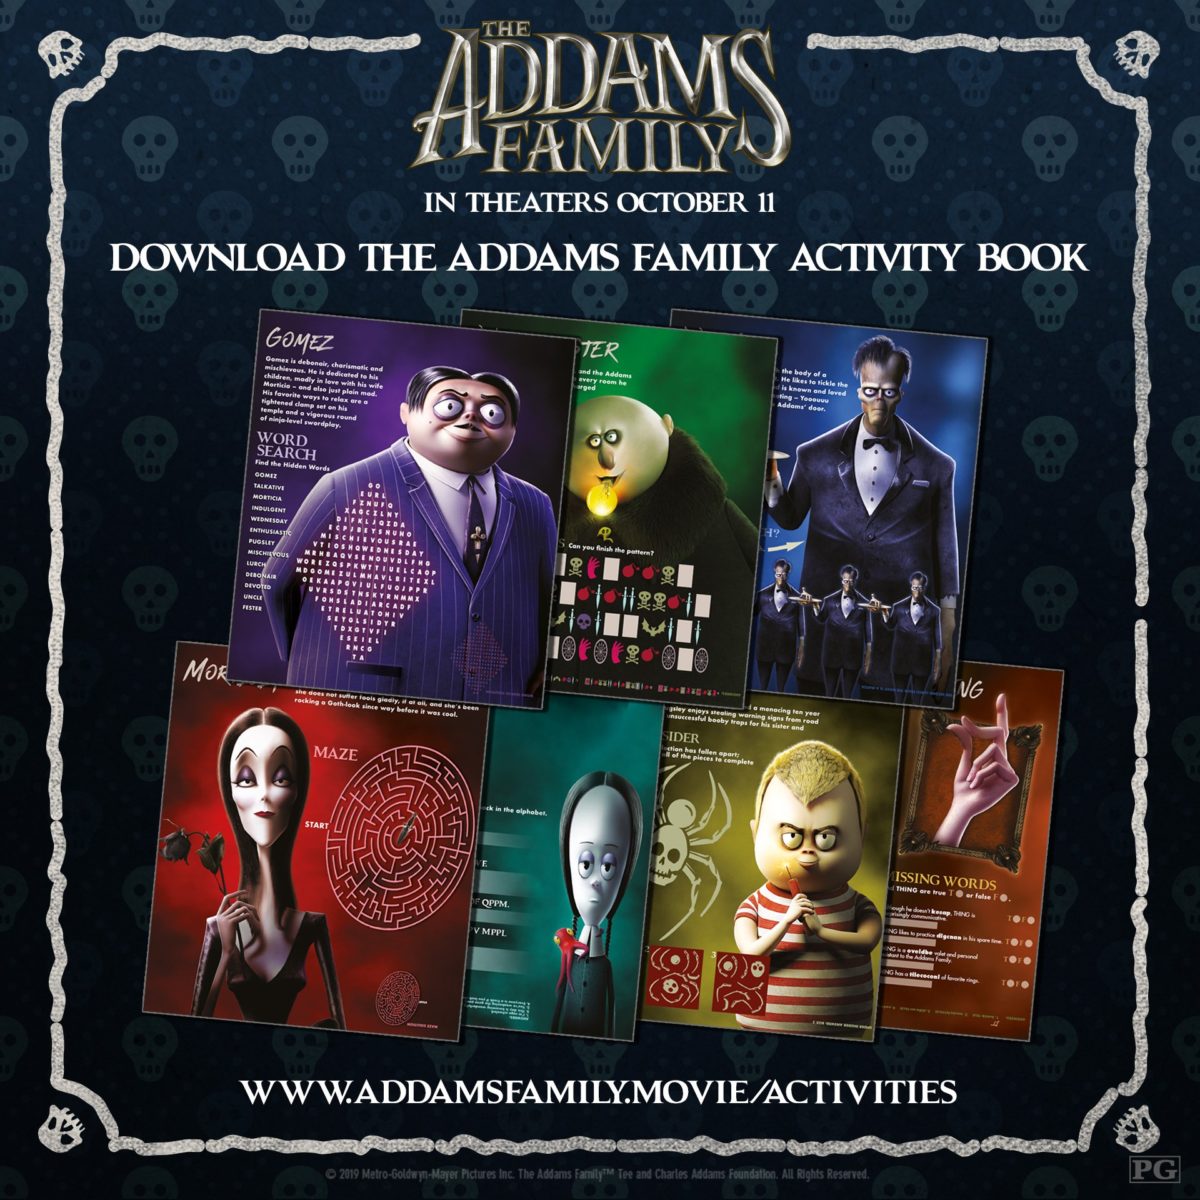 The Addams Family Free Activity Book and DIY Videos #MeetTheAddams